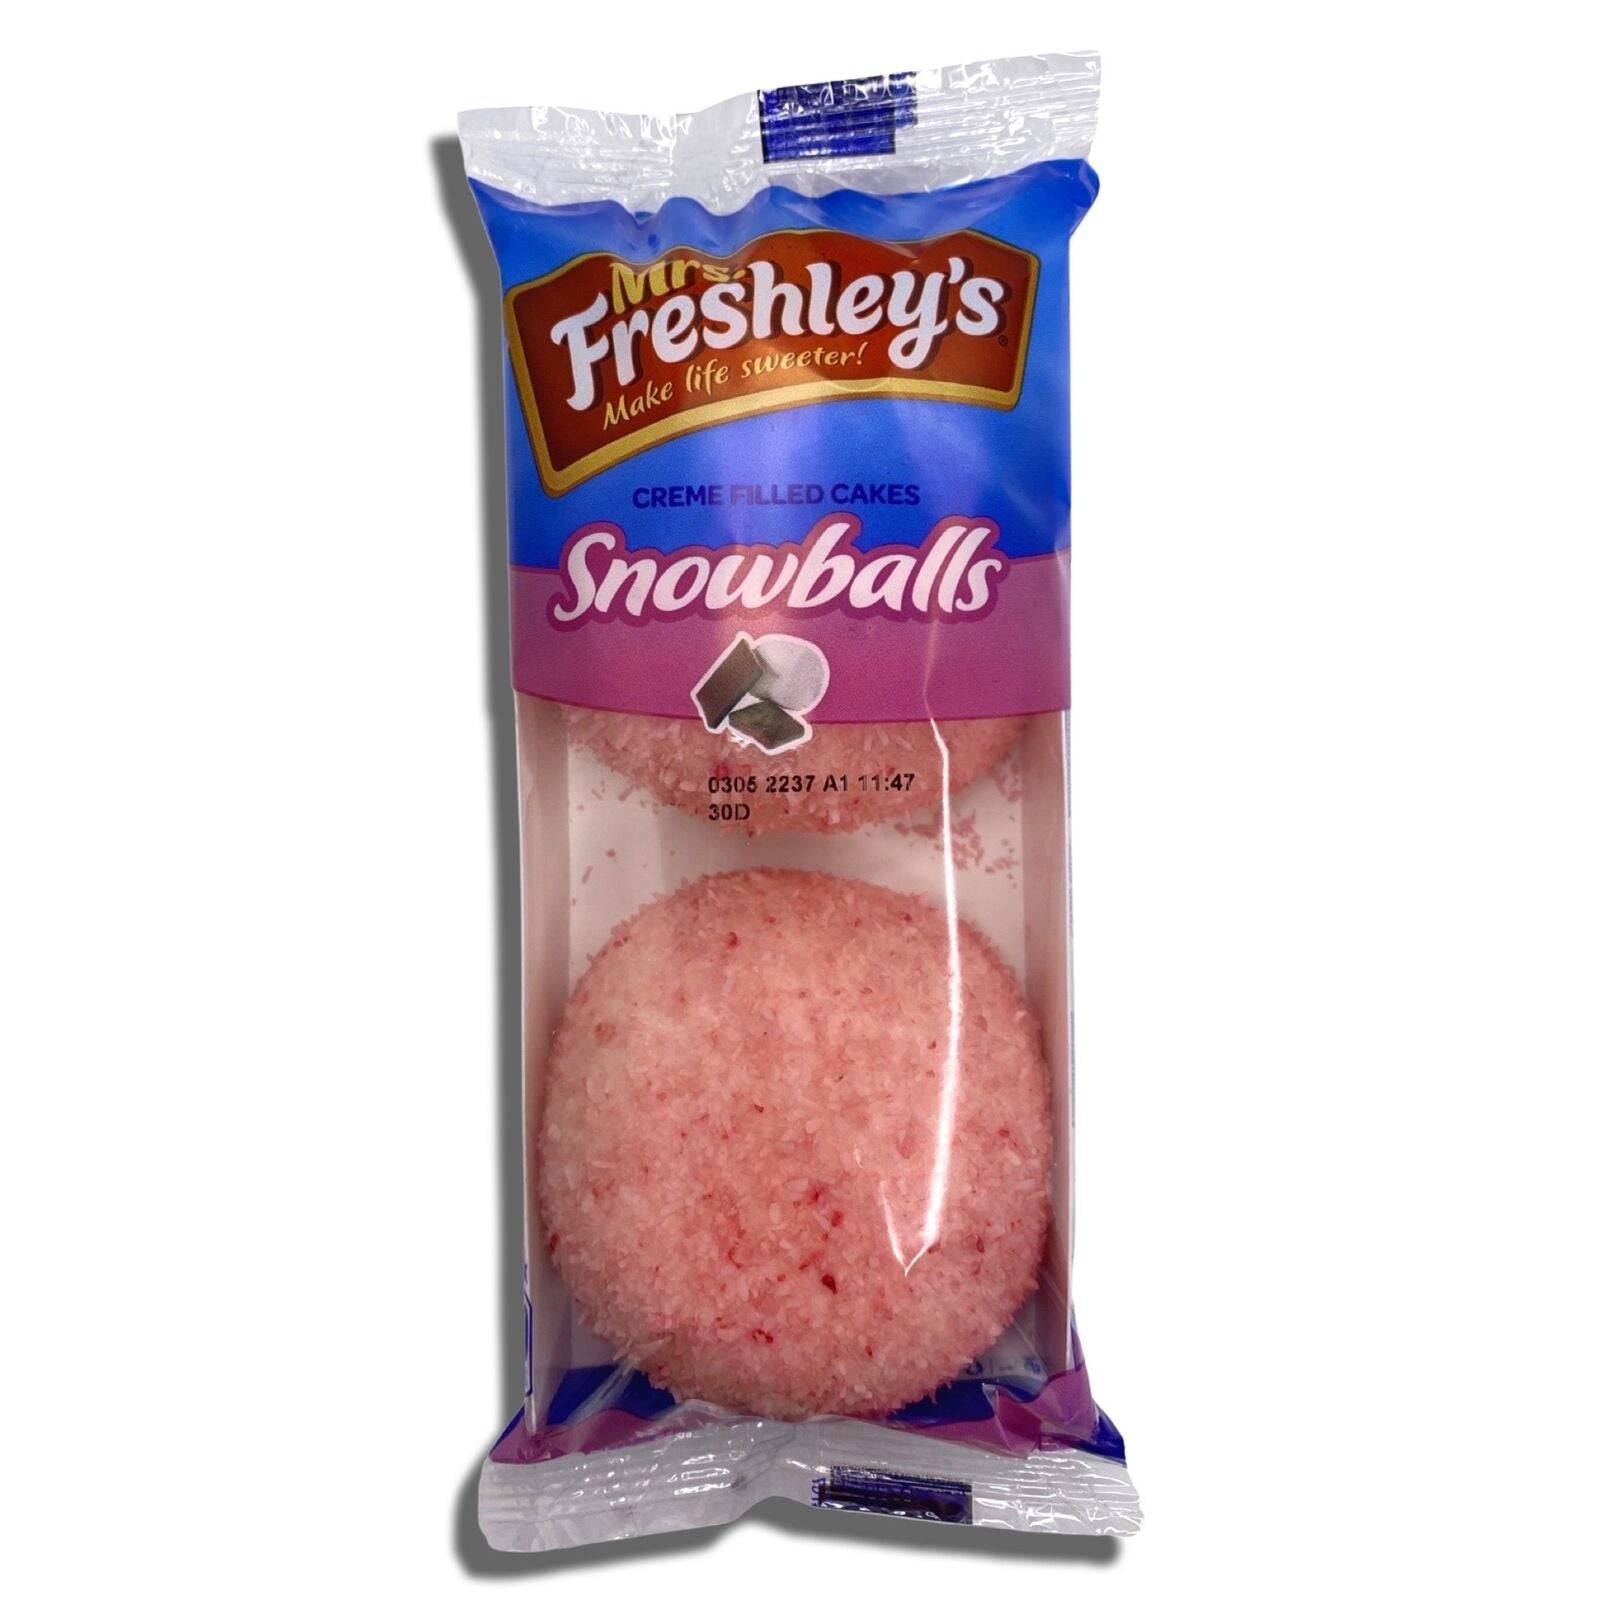 Tribeca Curations | Mrs. Freshley'S Snowballs Snack Cakes Value Pack Bundled By